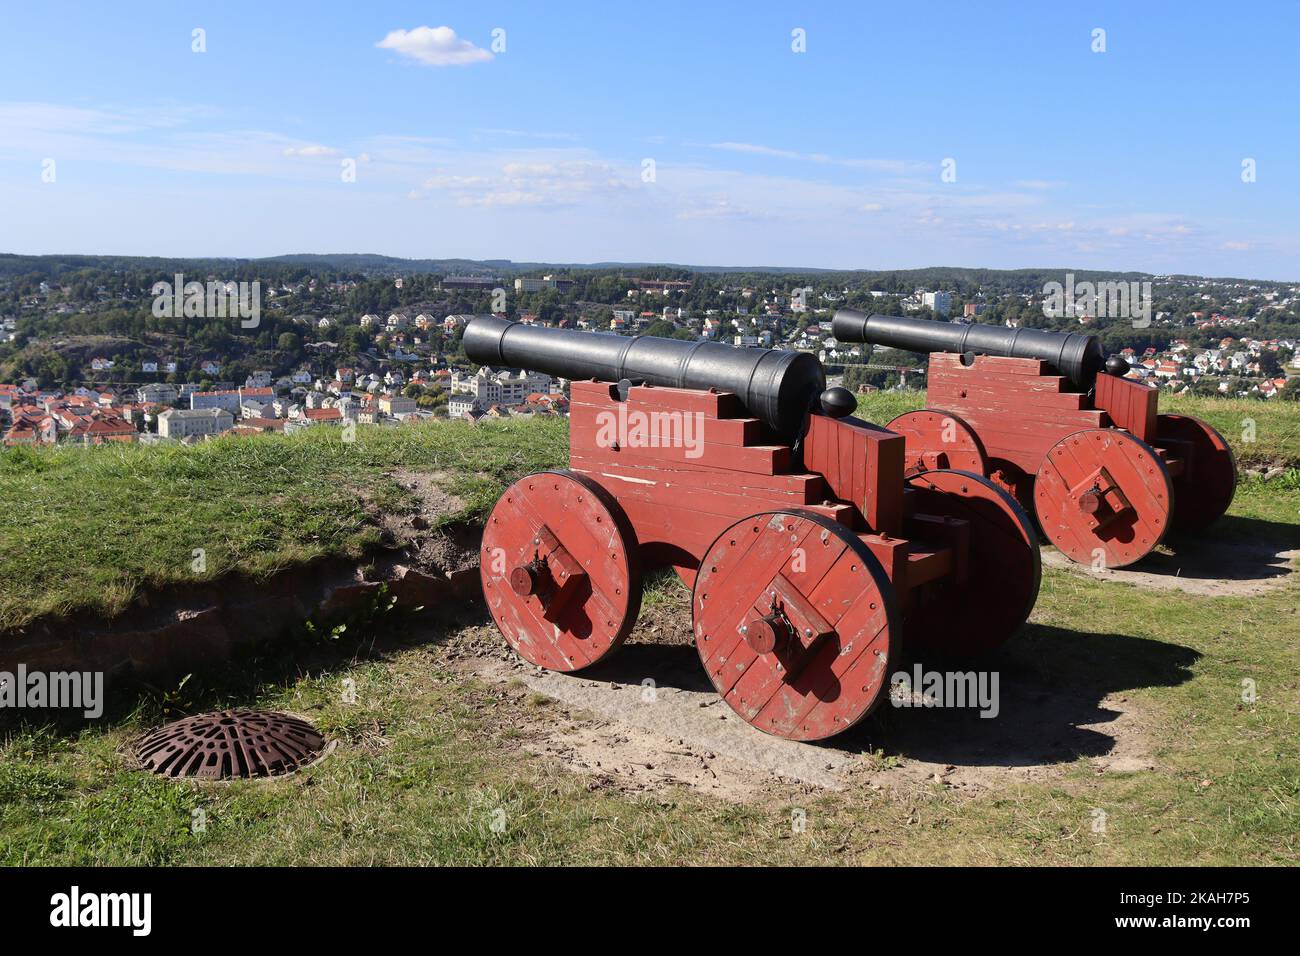 Two historic canons pointed towards Halden city from Fredriksten Fortress in Viken County, Norway. Copy space above. Stock Photo